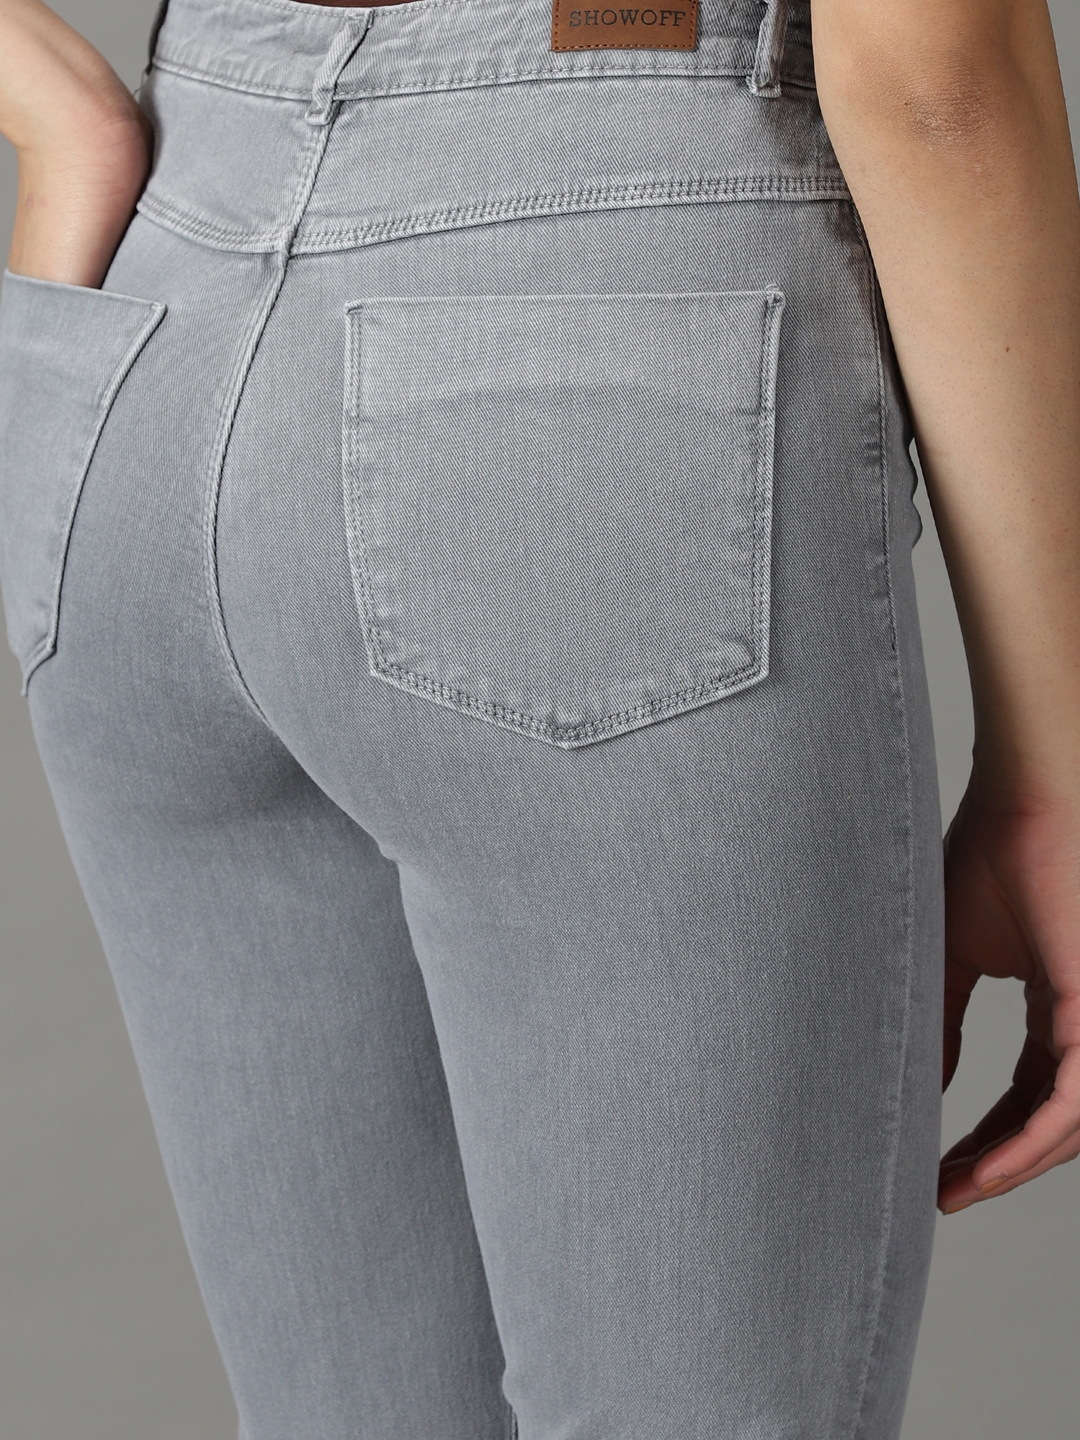 Showoff | SHOWOFF Women Grey Solid  Bootcut Jeans 6